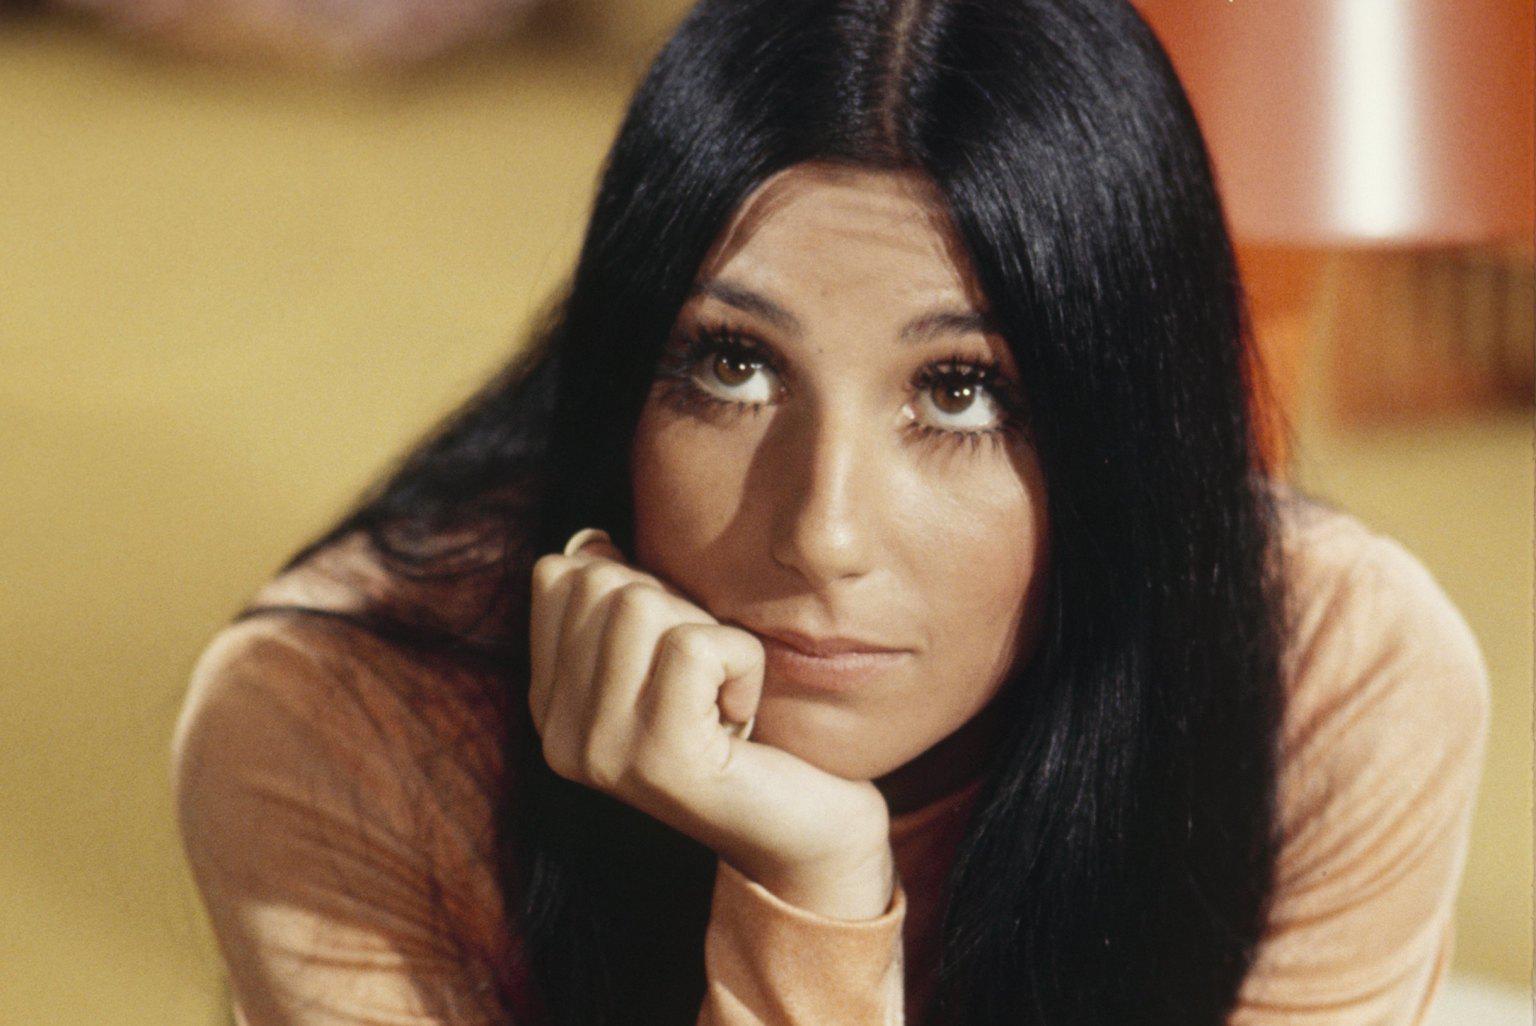 Happy Birthday to Cher, who turns 69 today! 